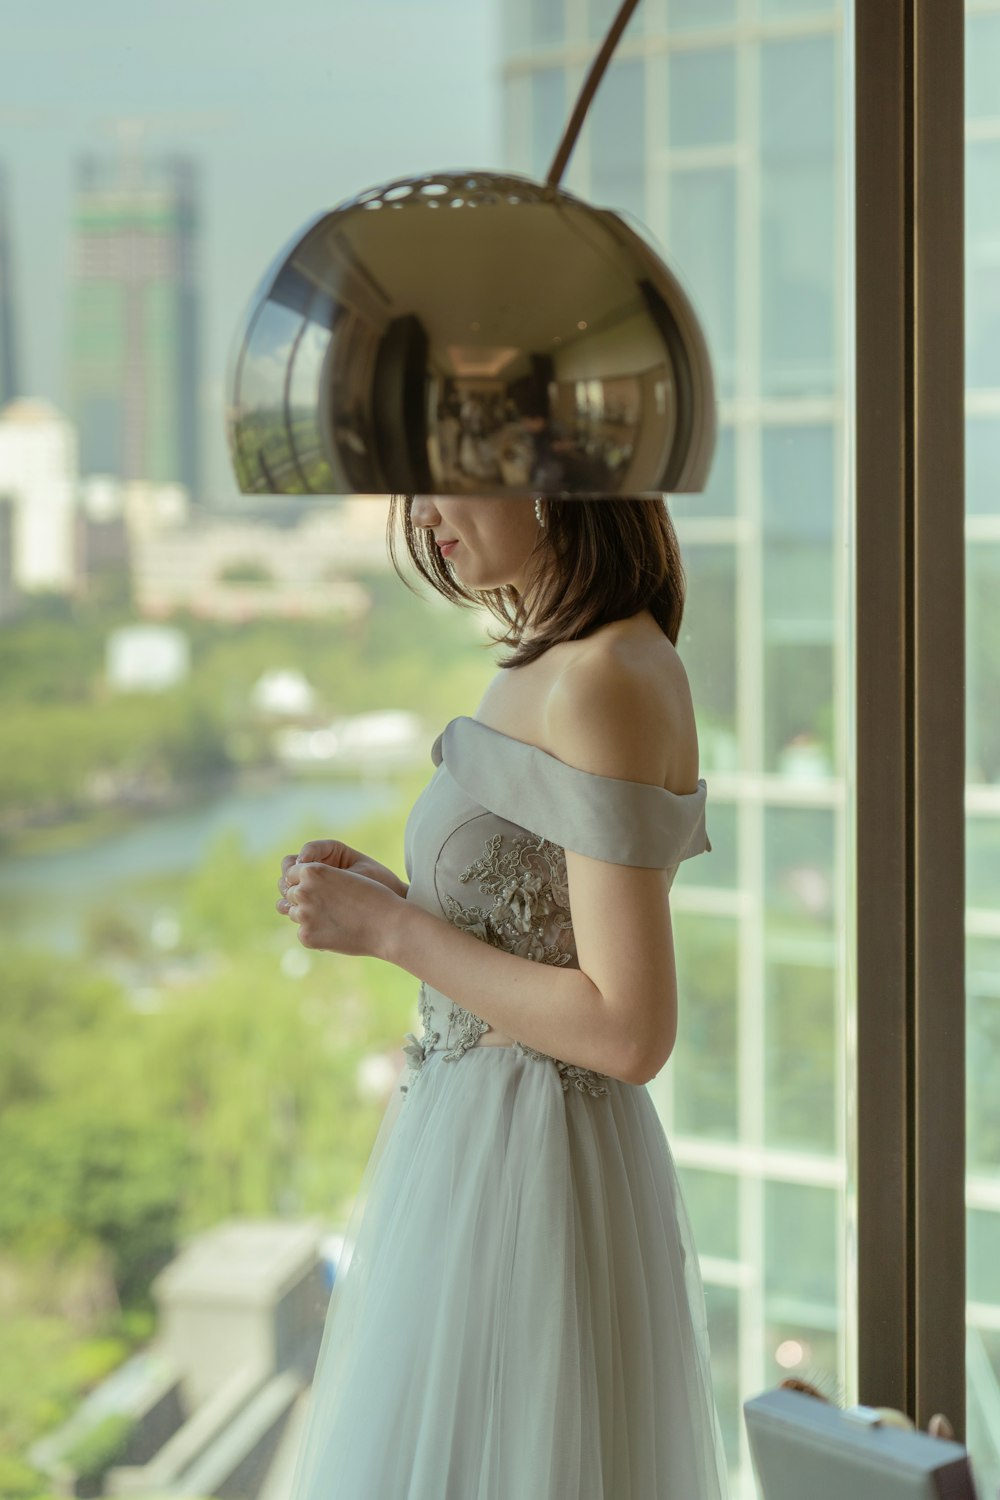 a woman in a white dress looking out a window